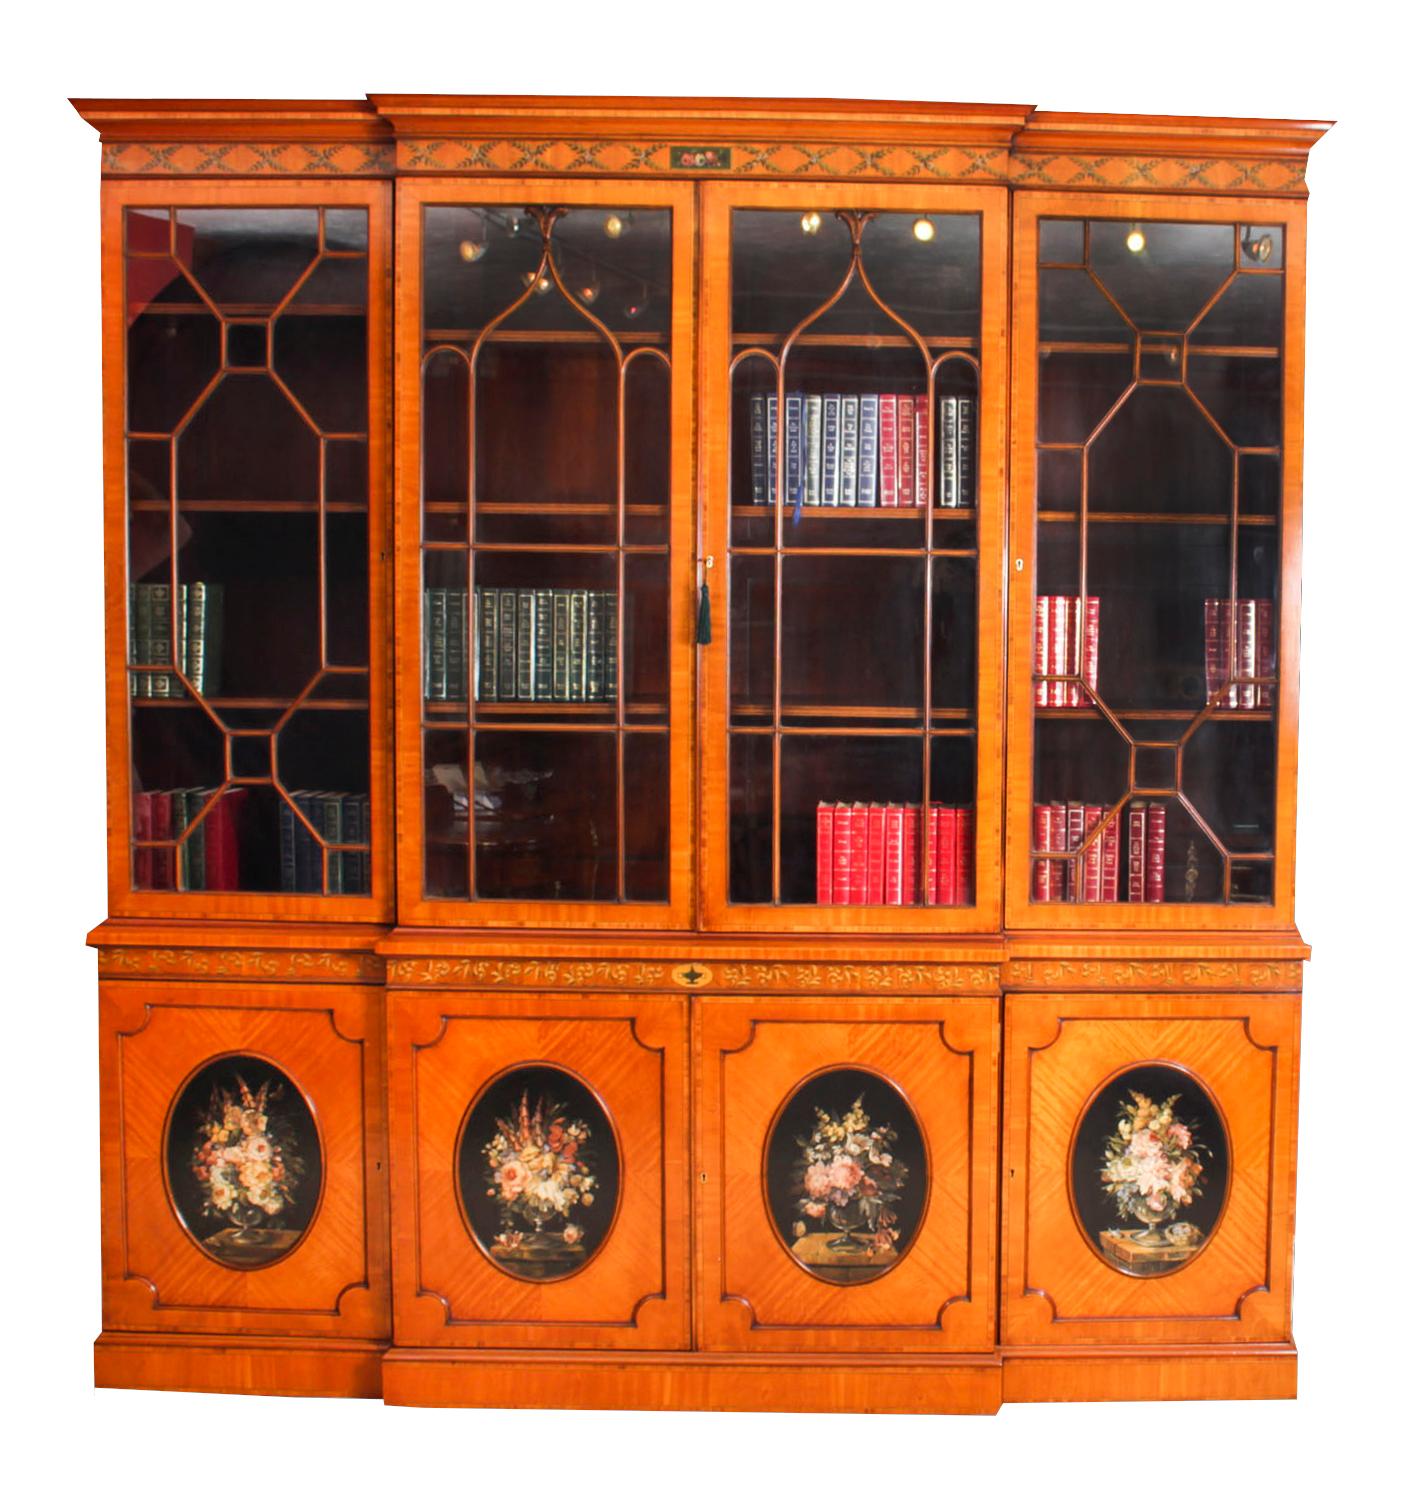 This is a beautiful antique Sheraton Revival top quality four door breakfront bookcase, masterfully crafted in rich satinwood, circa 1880 in date.

This magnificent bookcase features a frieze and cornice beautifully hand painted with scrolling